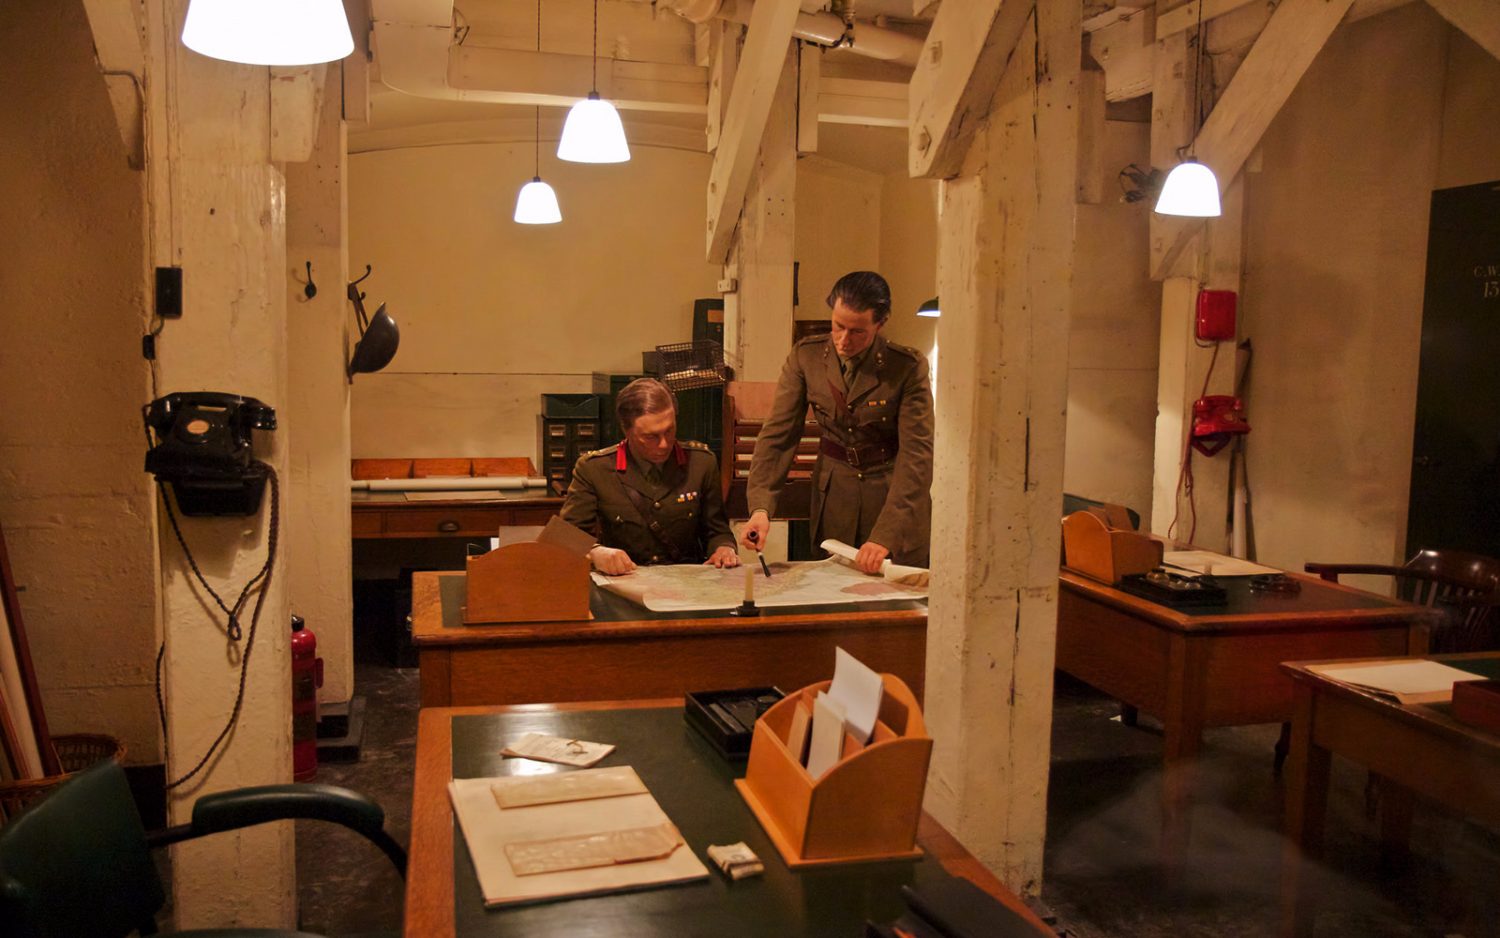 Churchill War Rooms tickets - Only - Tickets.co.uk